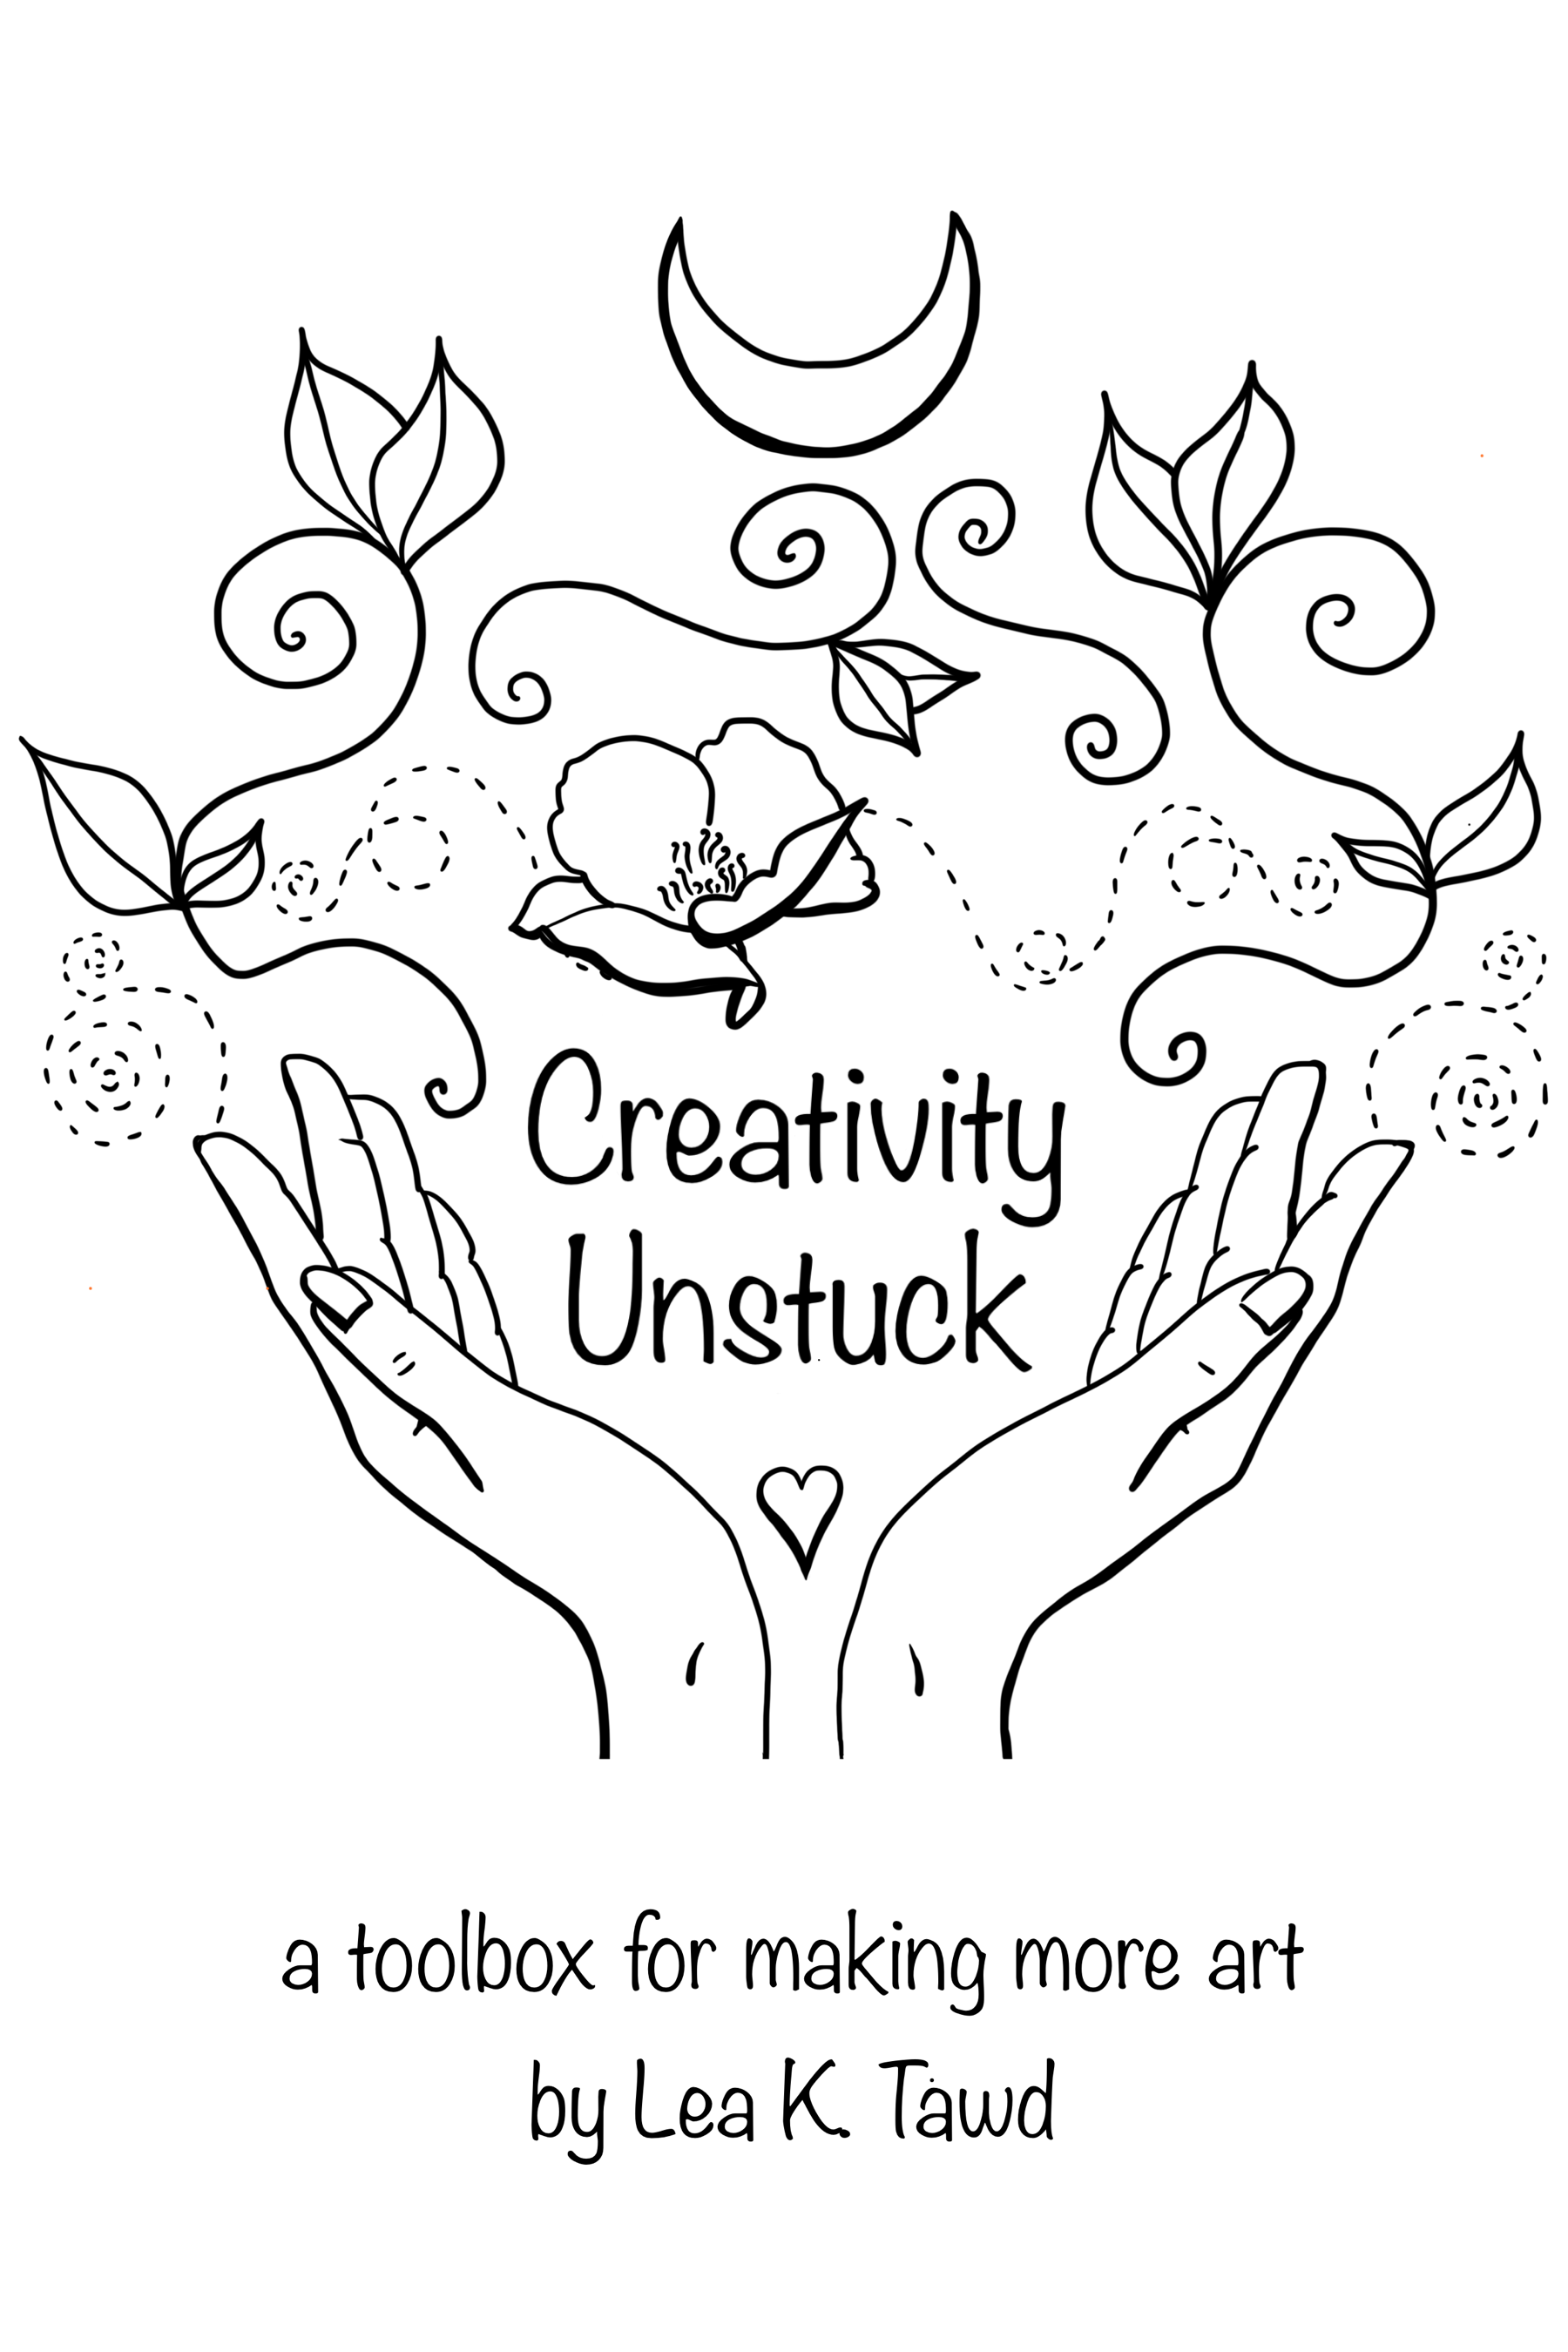 Creativity Unstuck: a toolbox for making more art by Lea K. Tawd cover image shows an illustration of two hands with a heart between them, with flowers and vines flowing between the hands and a moon at the top